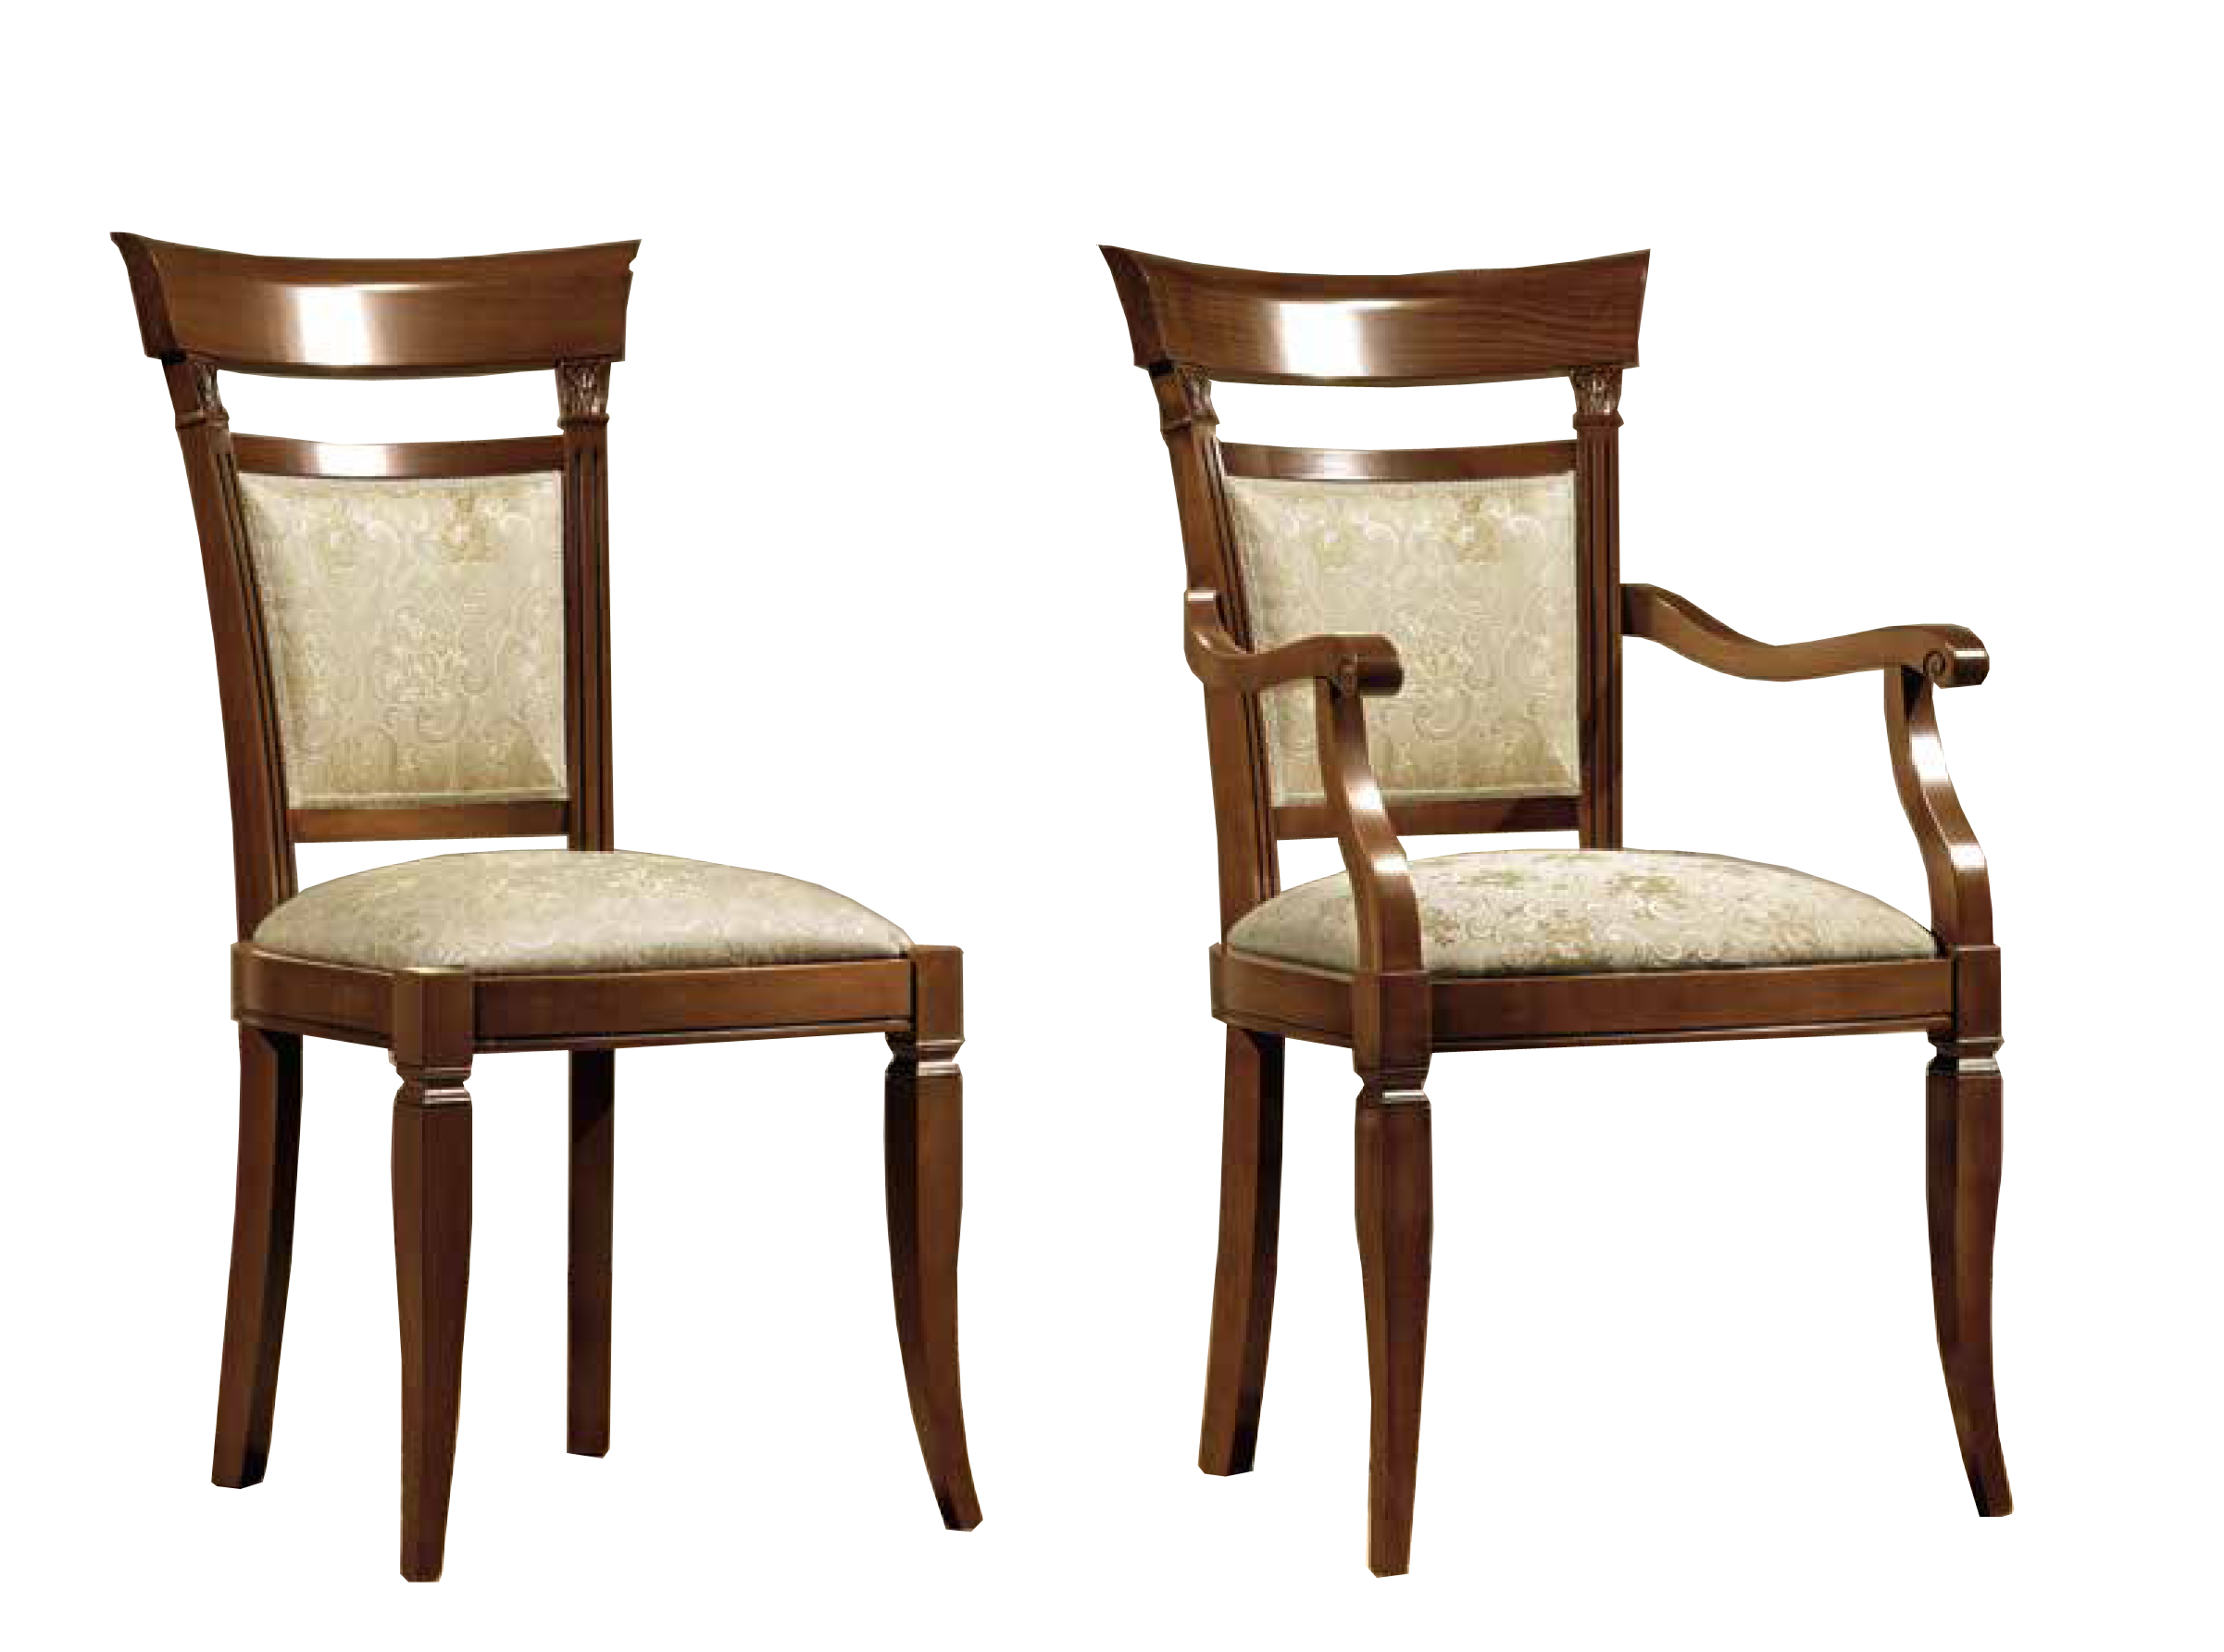 Dining Room Furniture Chairs Treviso Chairs Cherry